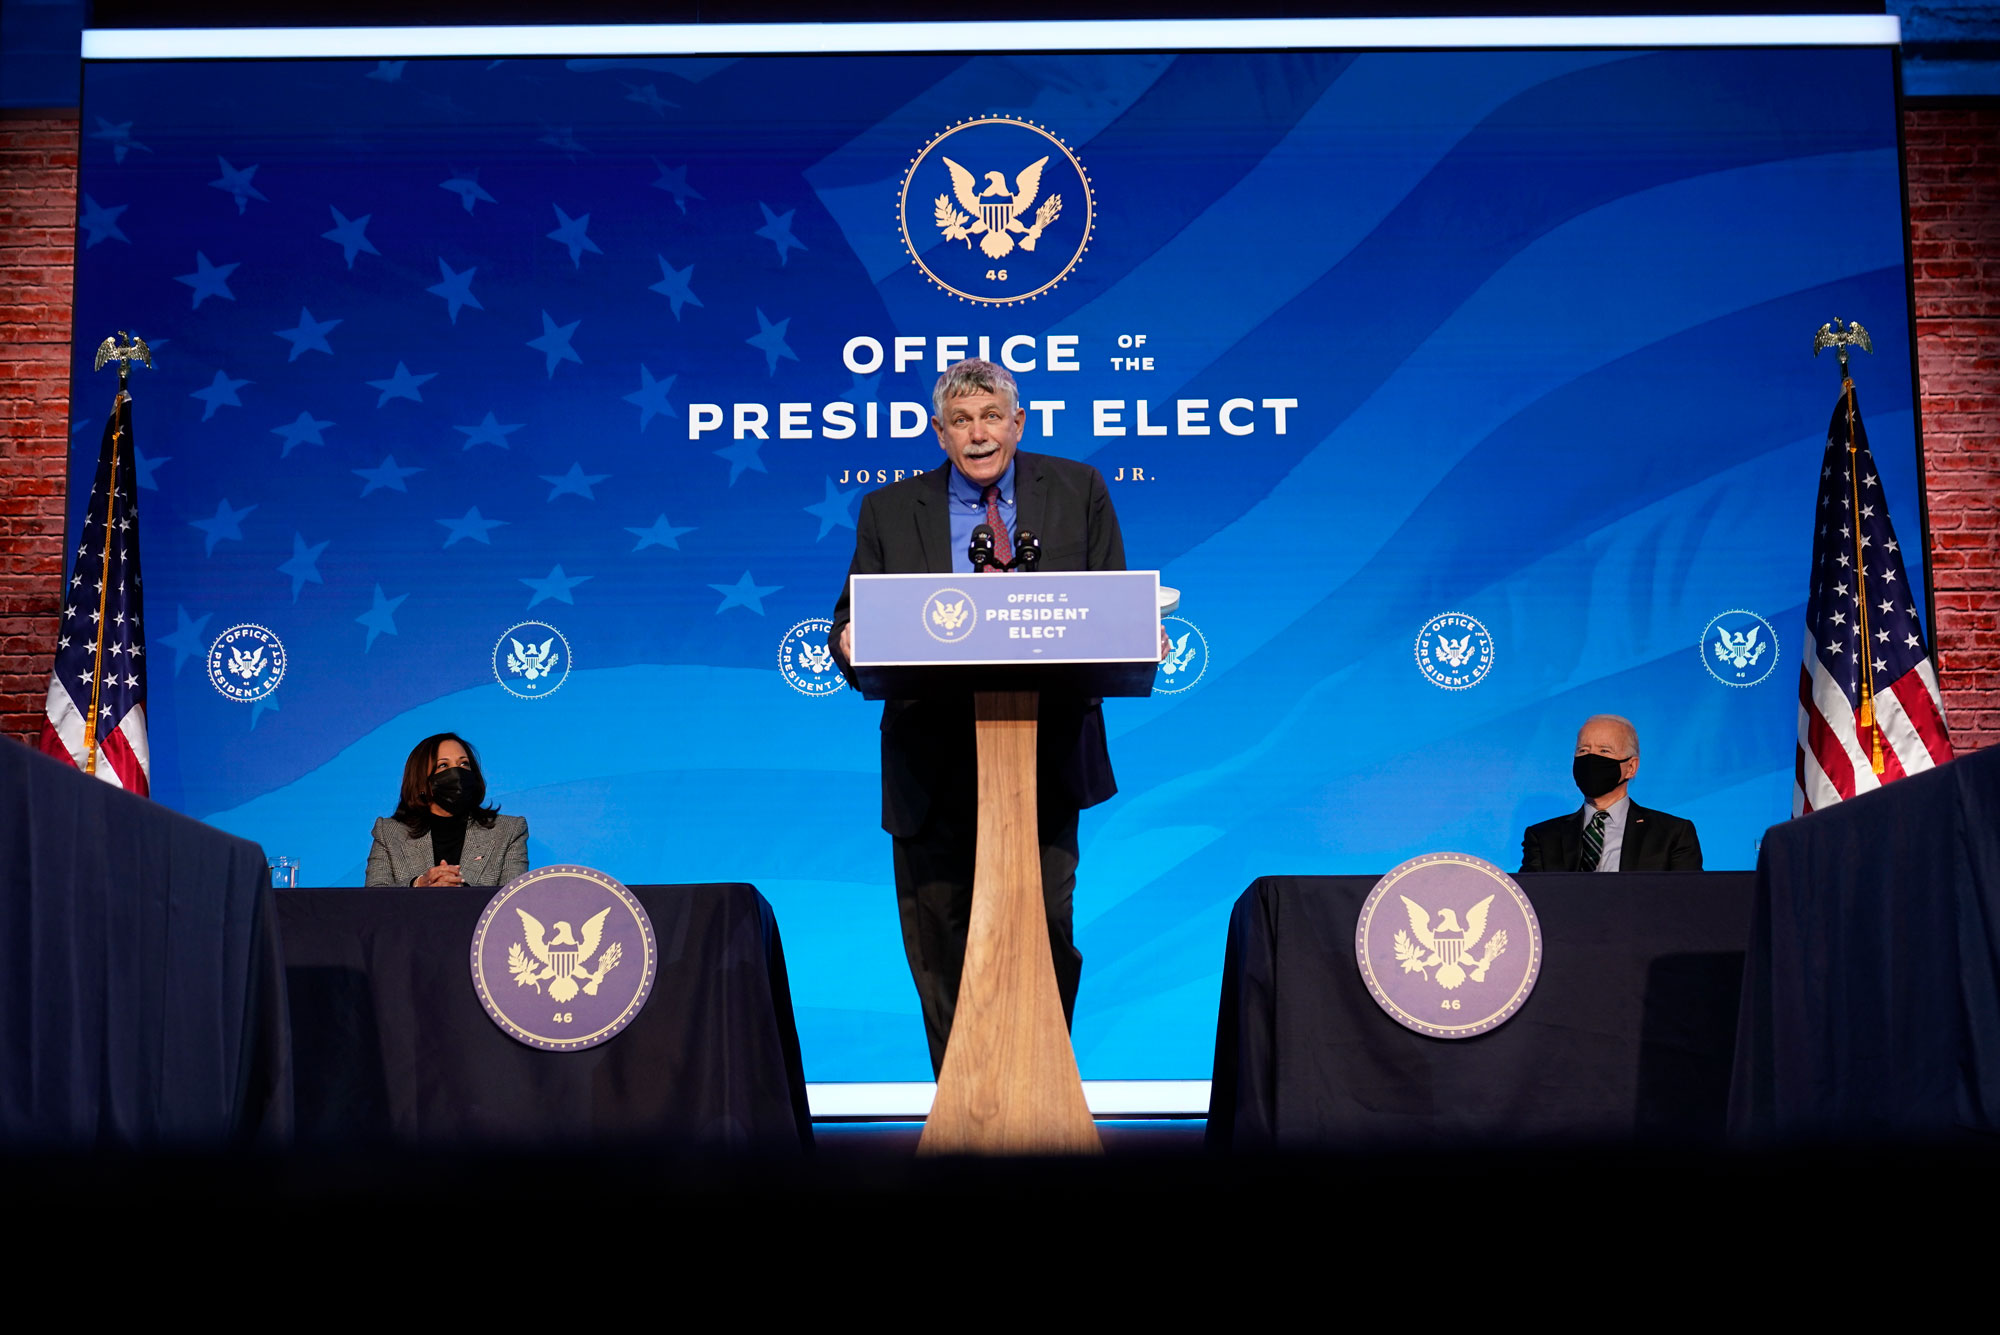 A photo of Eric Lander standing at a podium in front of a back drop that reads "Office of the President Elect"